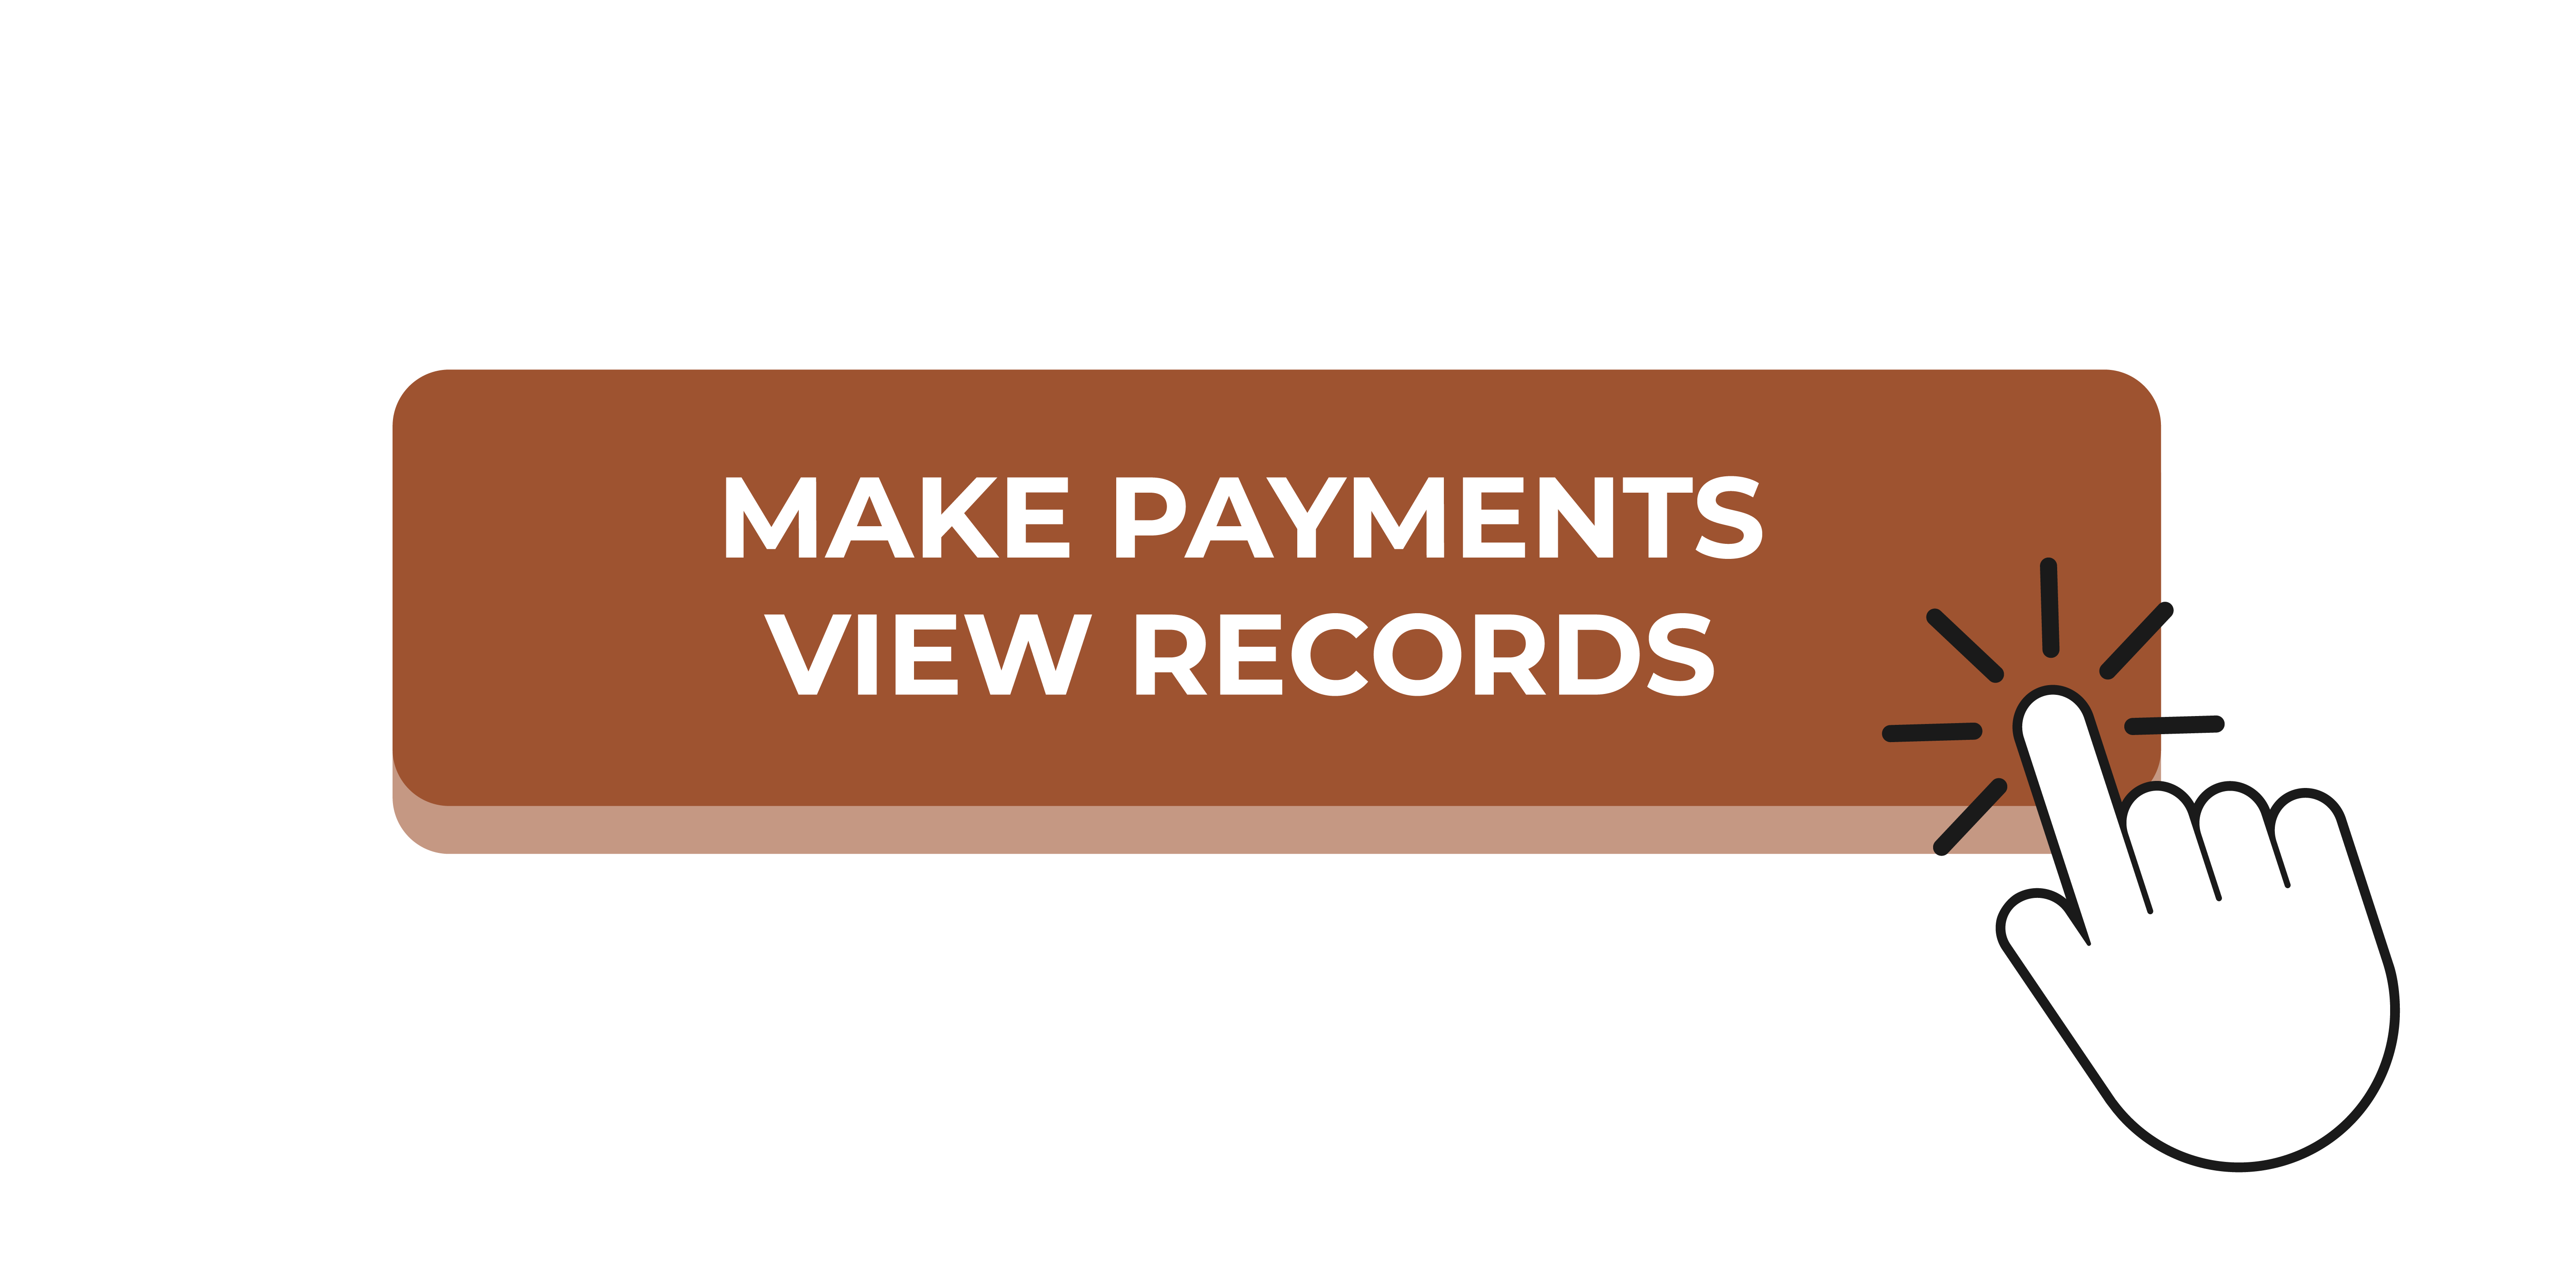 Make or View Payments link